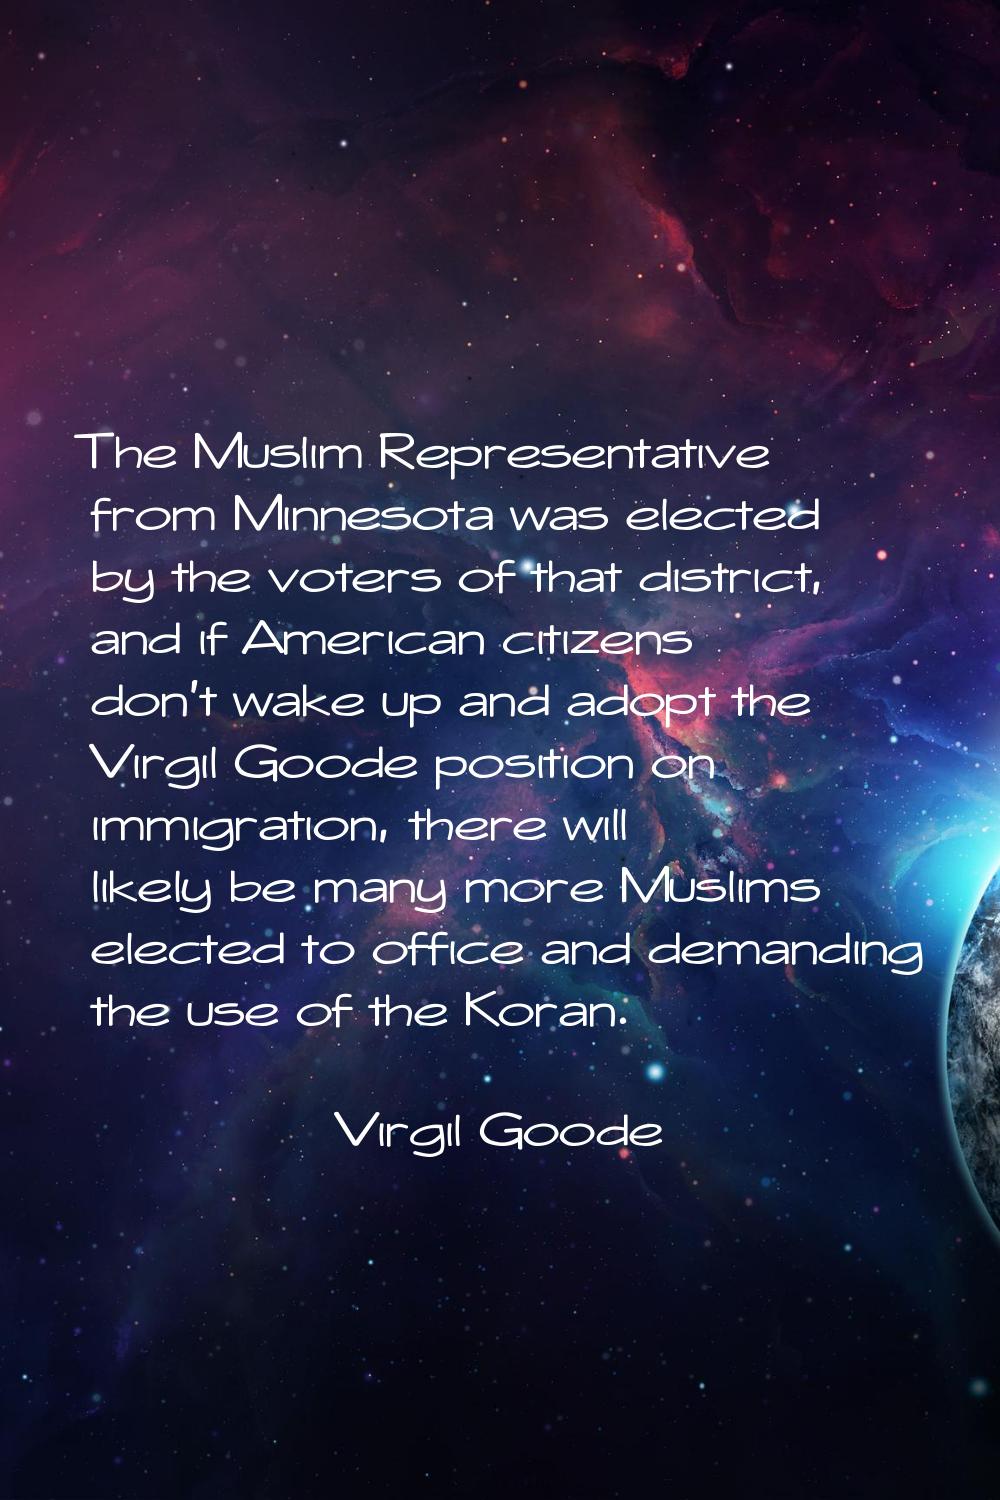 The Muslim Representative from Minnesota was elected by the voters of that district, and if America